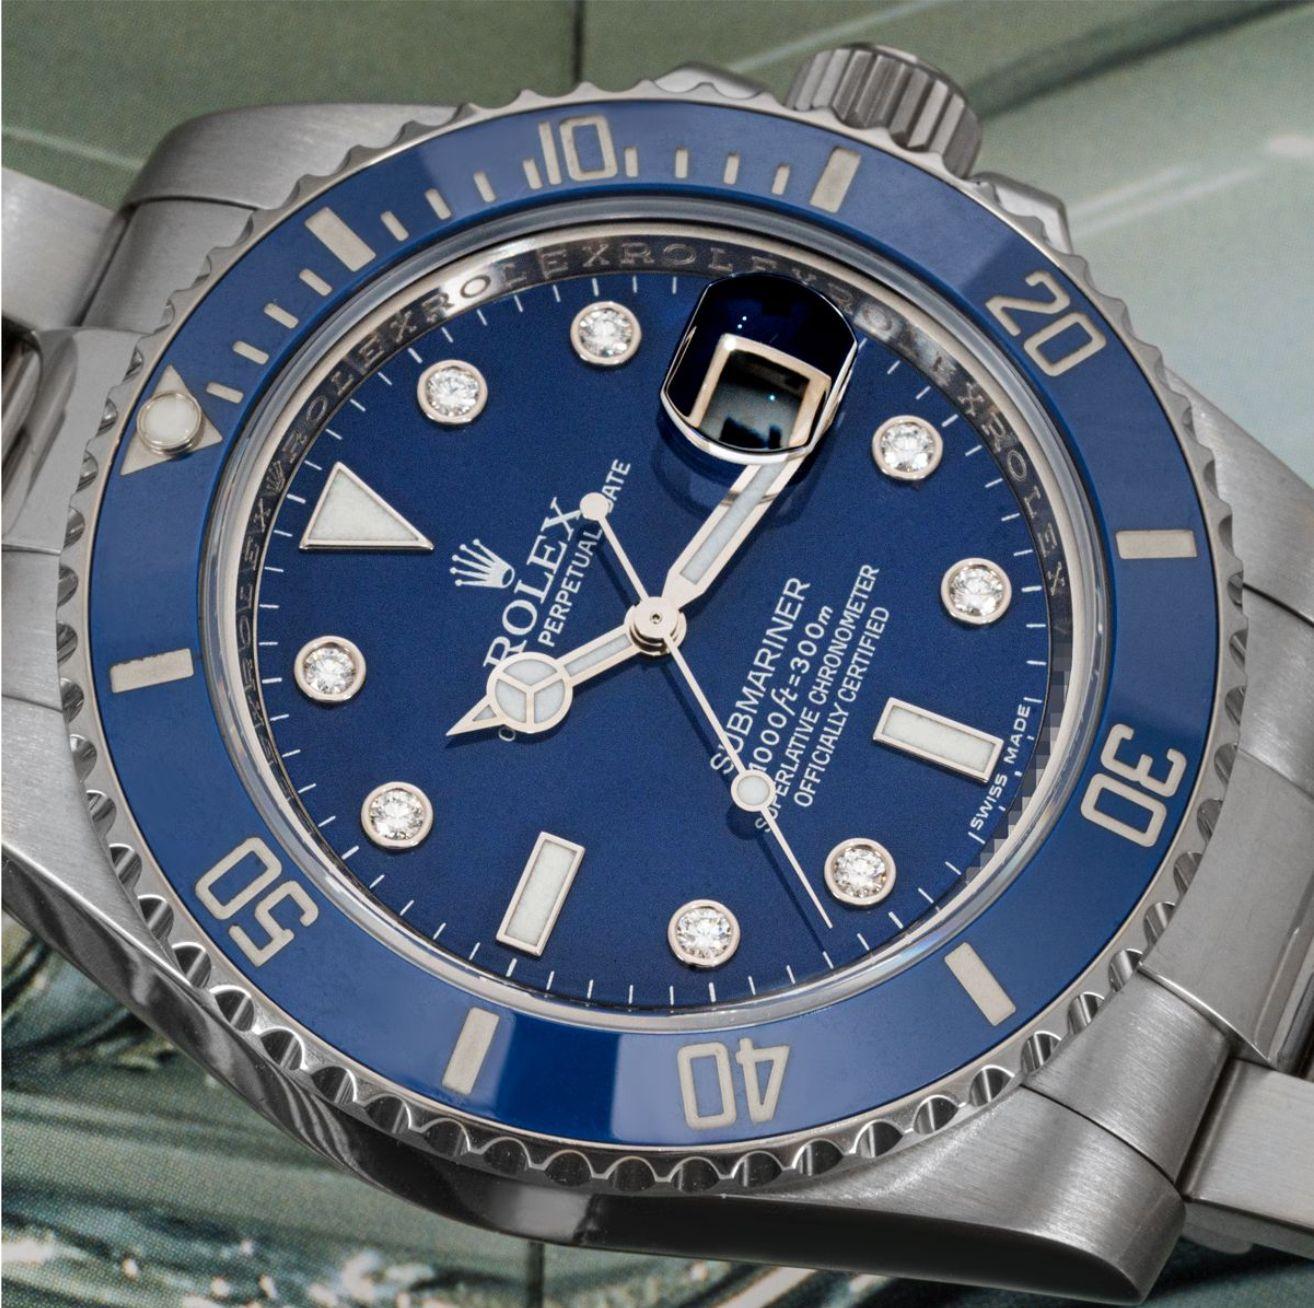 A white gold Submariner Date Smurf by Rolex. Featuring a blue dial with diamond set hour markers and a blue ceramic unidirectional rotatable bezel with 60-minute graduations. The Oyster bracelet comes with a folding Oysterlock clasp. Fitted with a